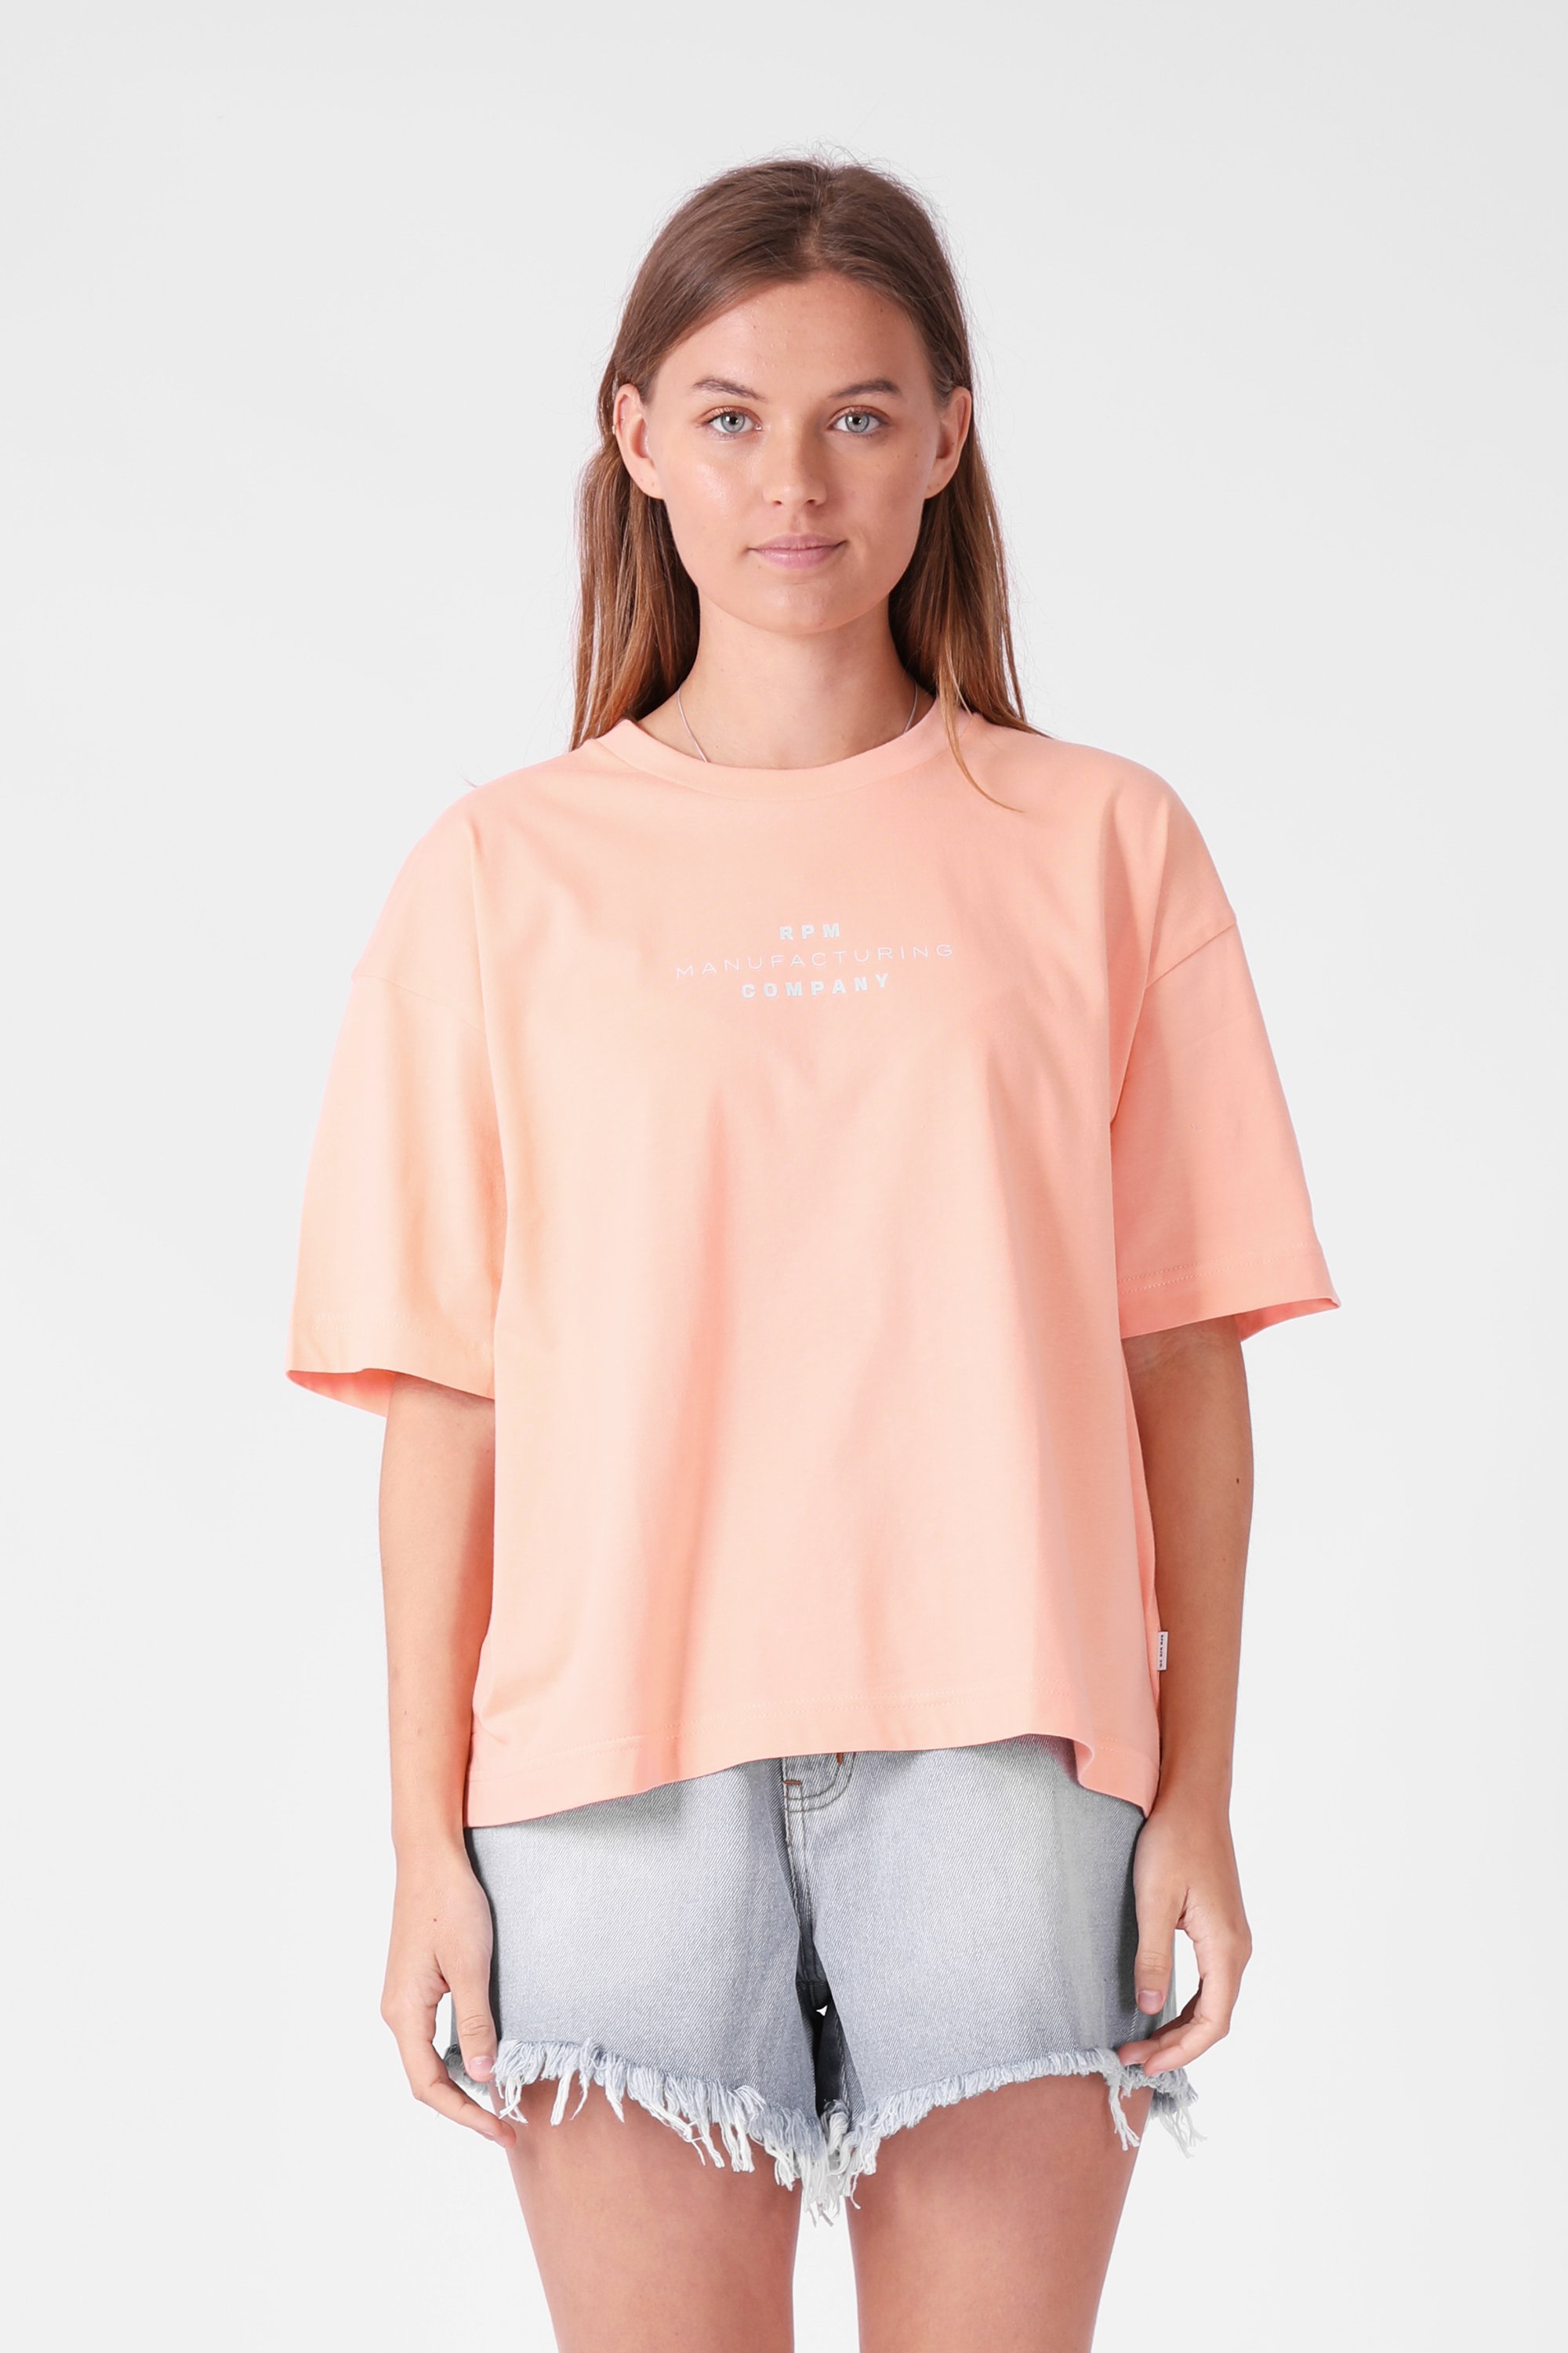 RPM - Baggy Tee - Womens-Tops : We stock the very latest in Surf ...